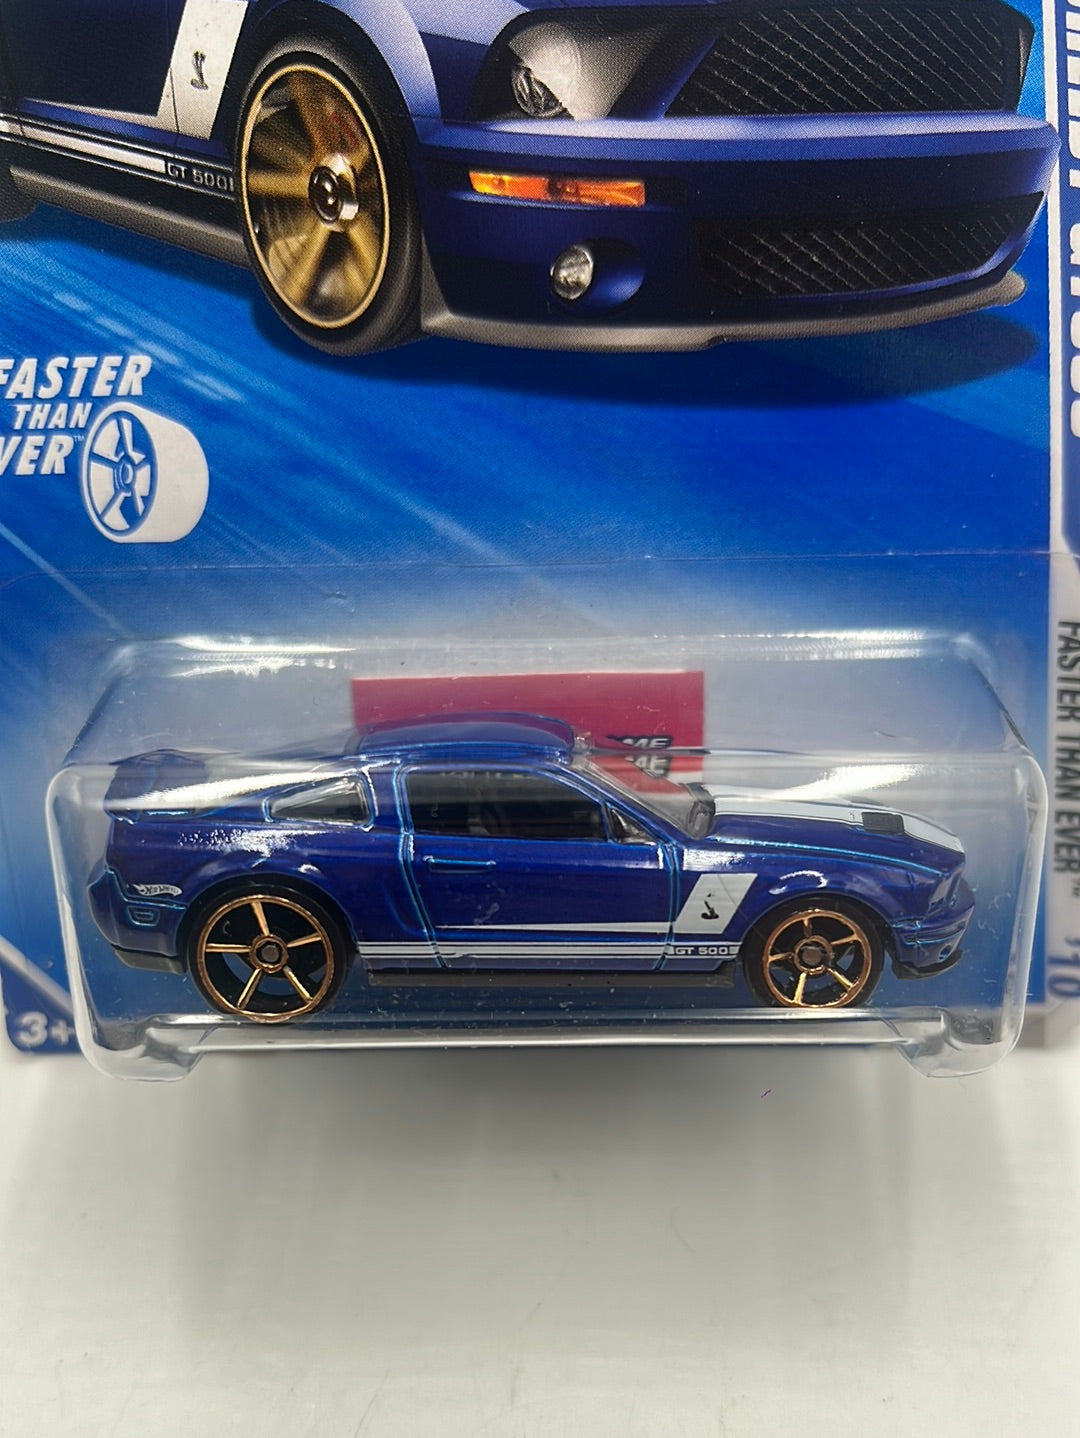 2010 Hot Wheels Faster Than Ever ‘07 Ford Shelby GT500 Blue 138/240 27G